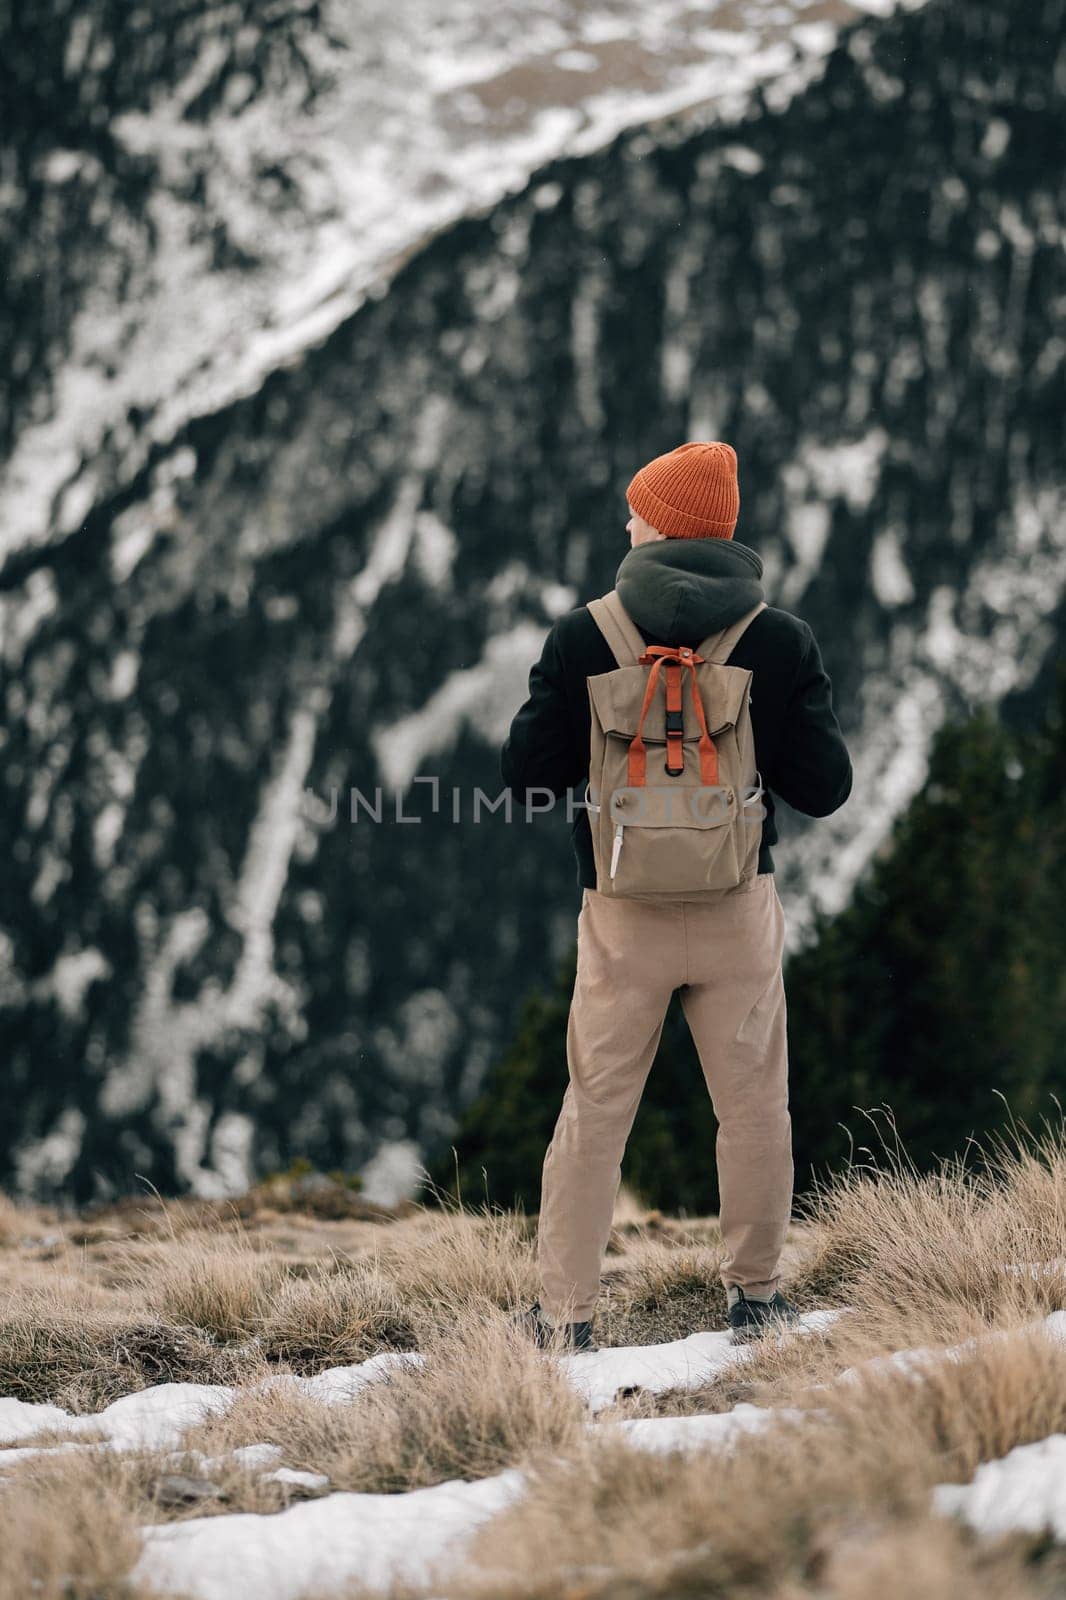 An adventurer gazes at majestic snow-capped mountains, evoking a sense of solitude and contemplation.